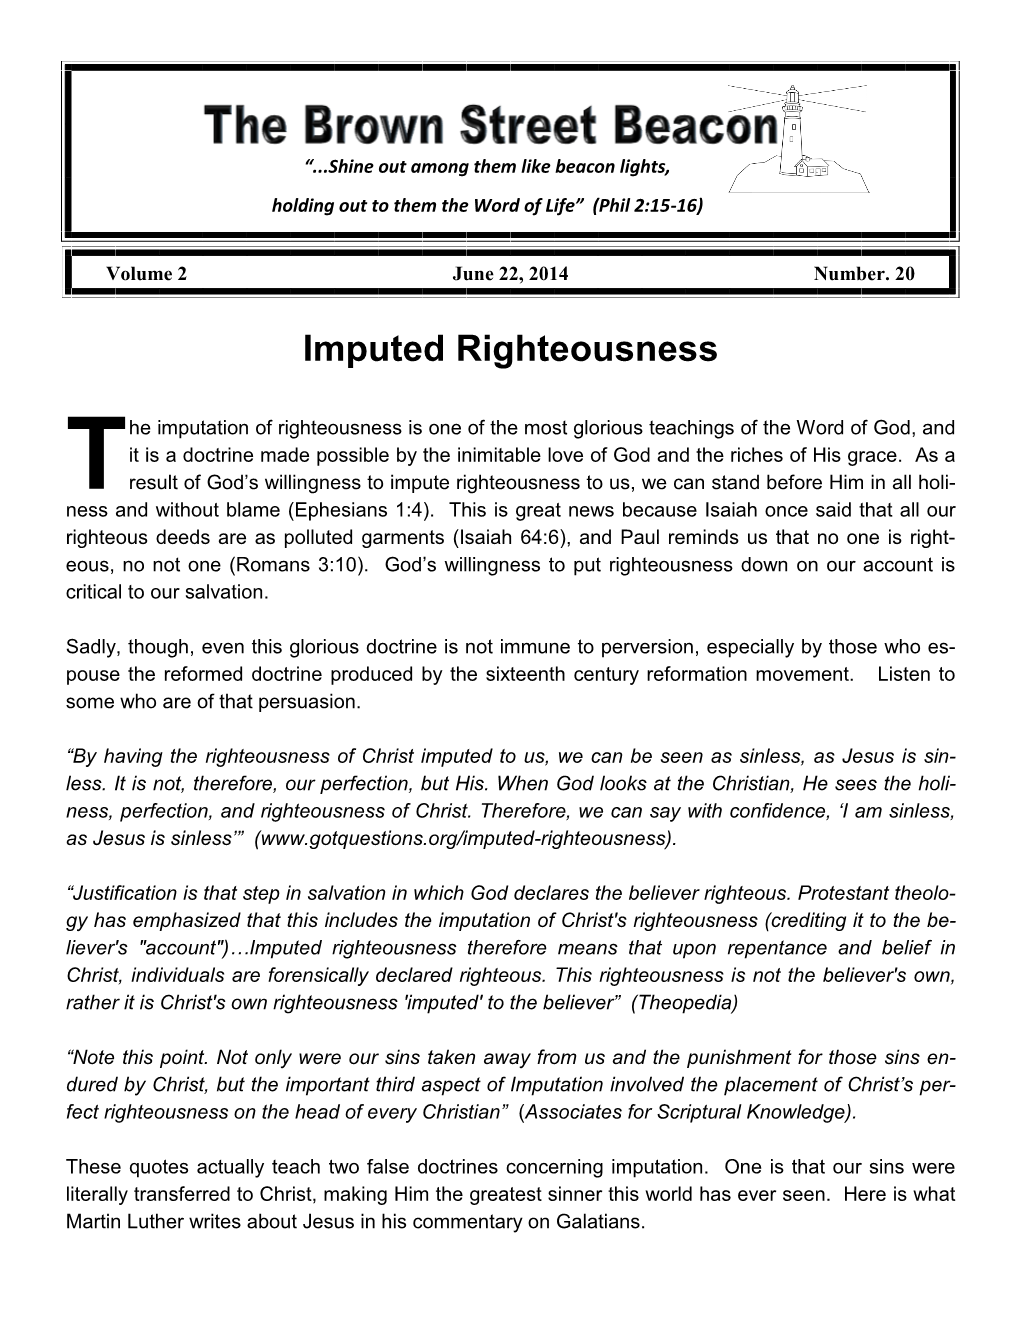 Imputed Righteousness